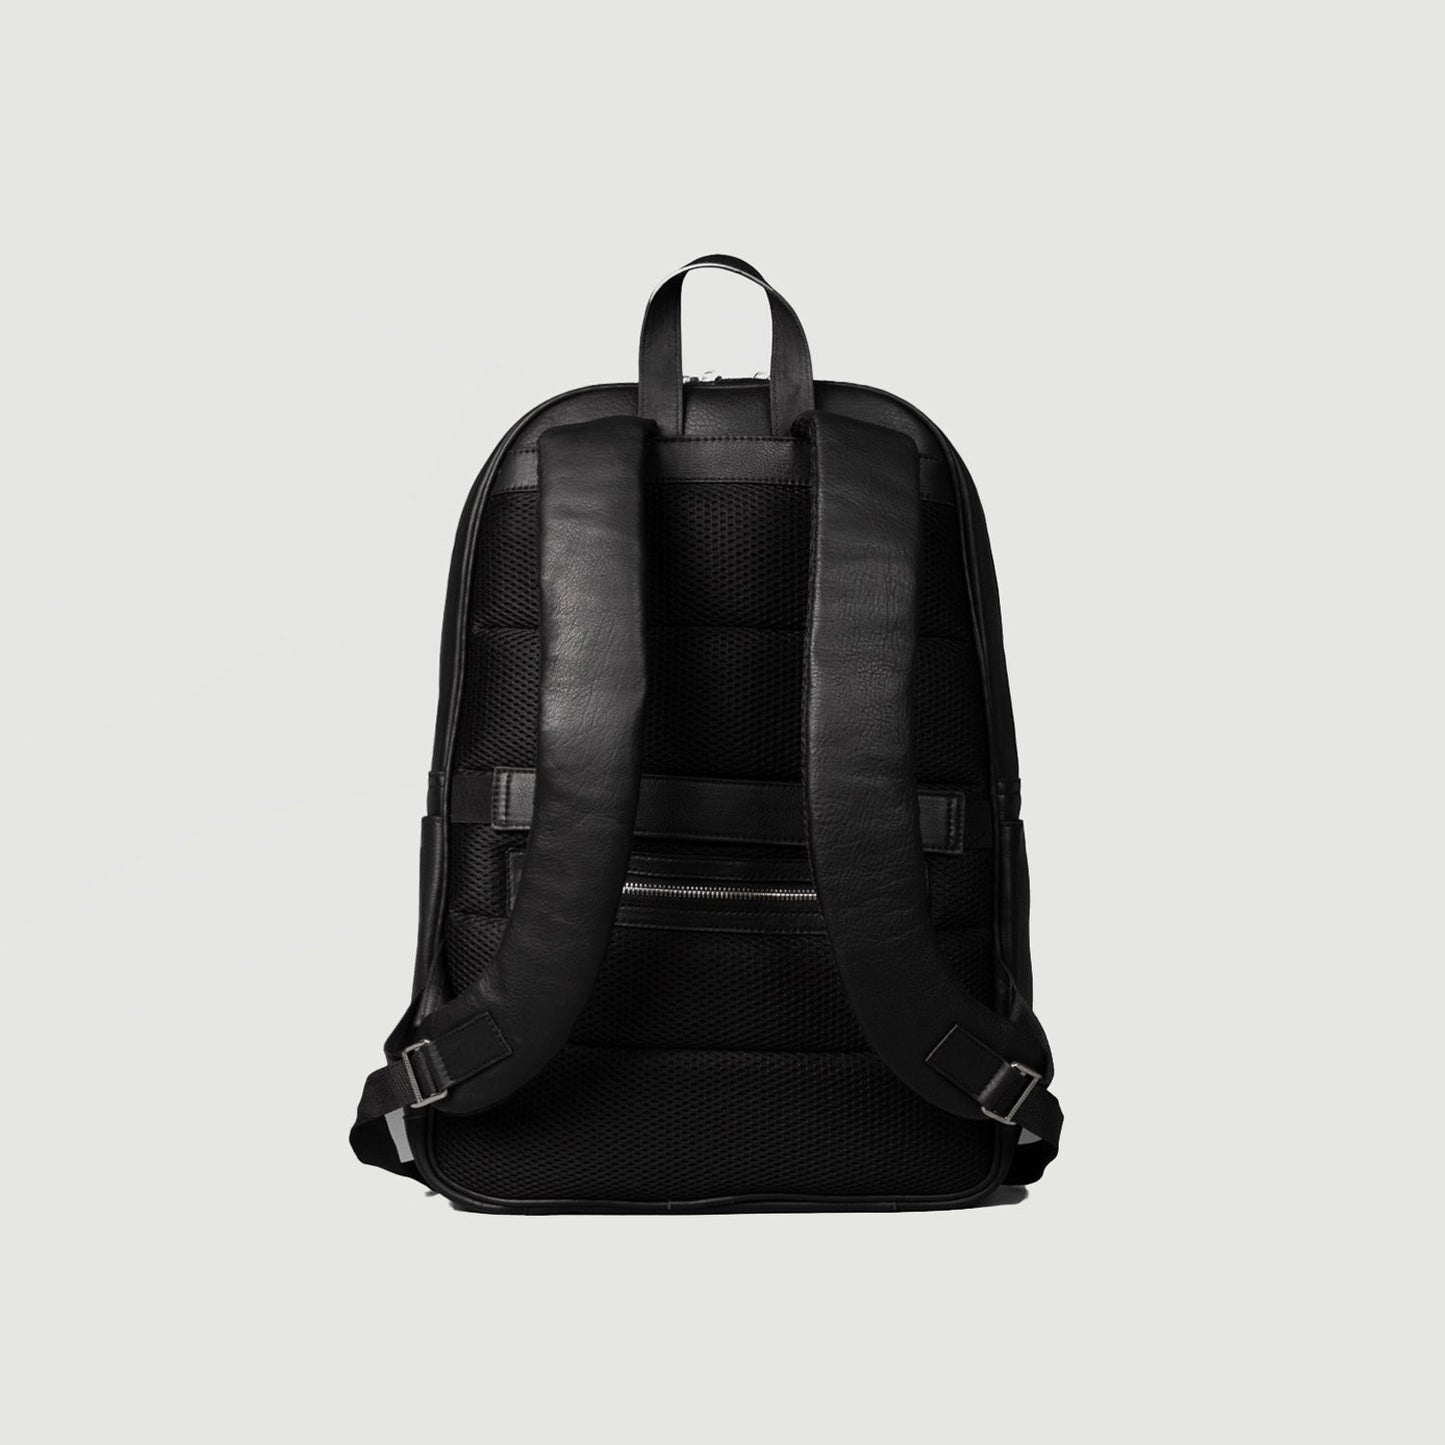 The Philos Black Leather Backpack